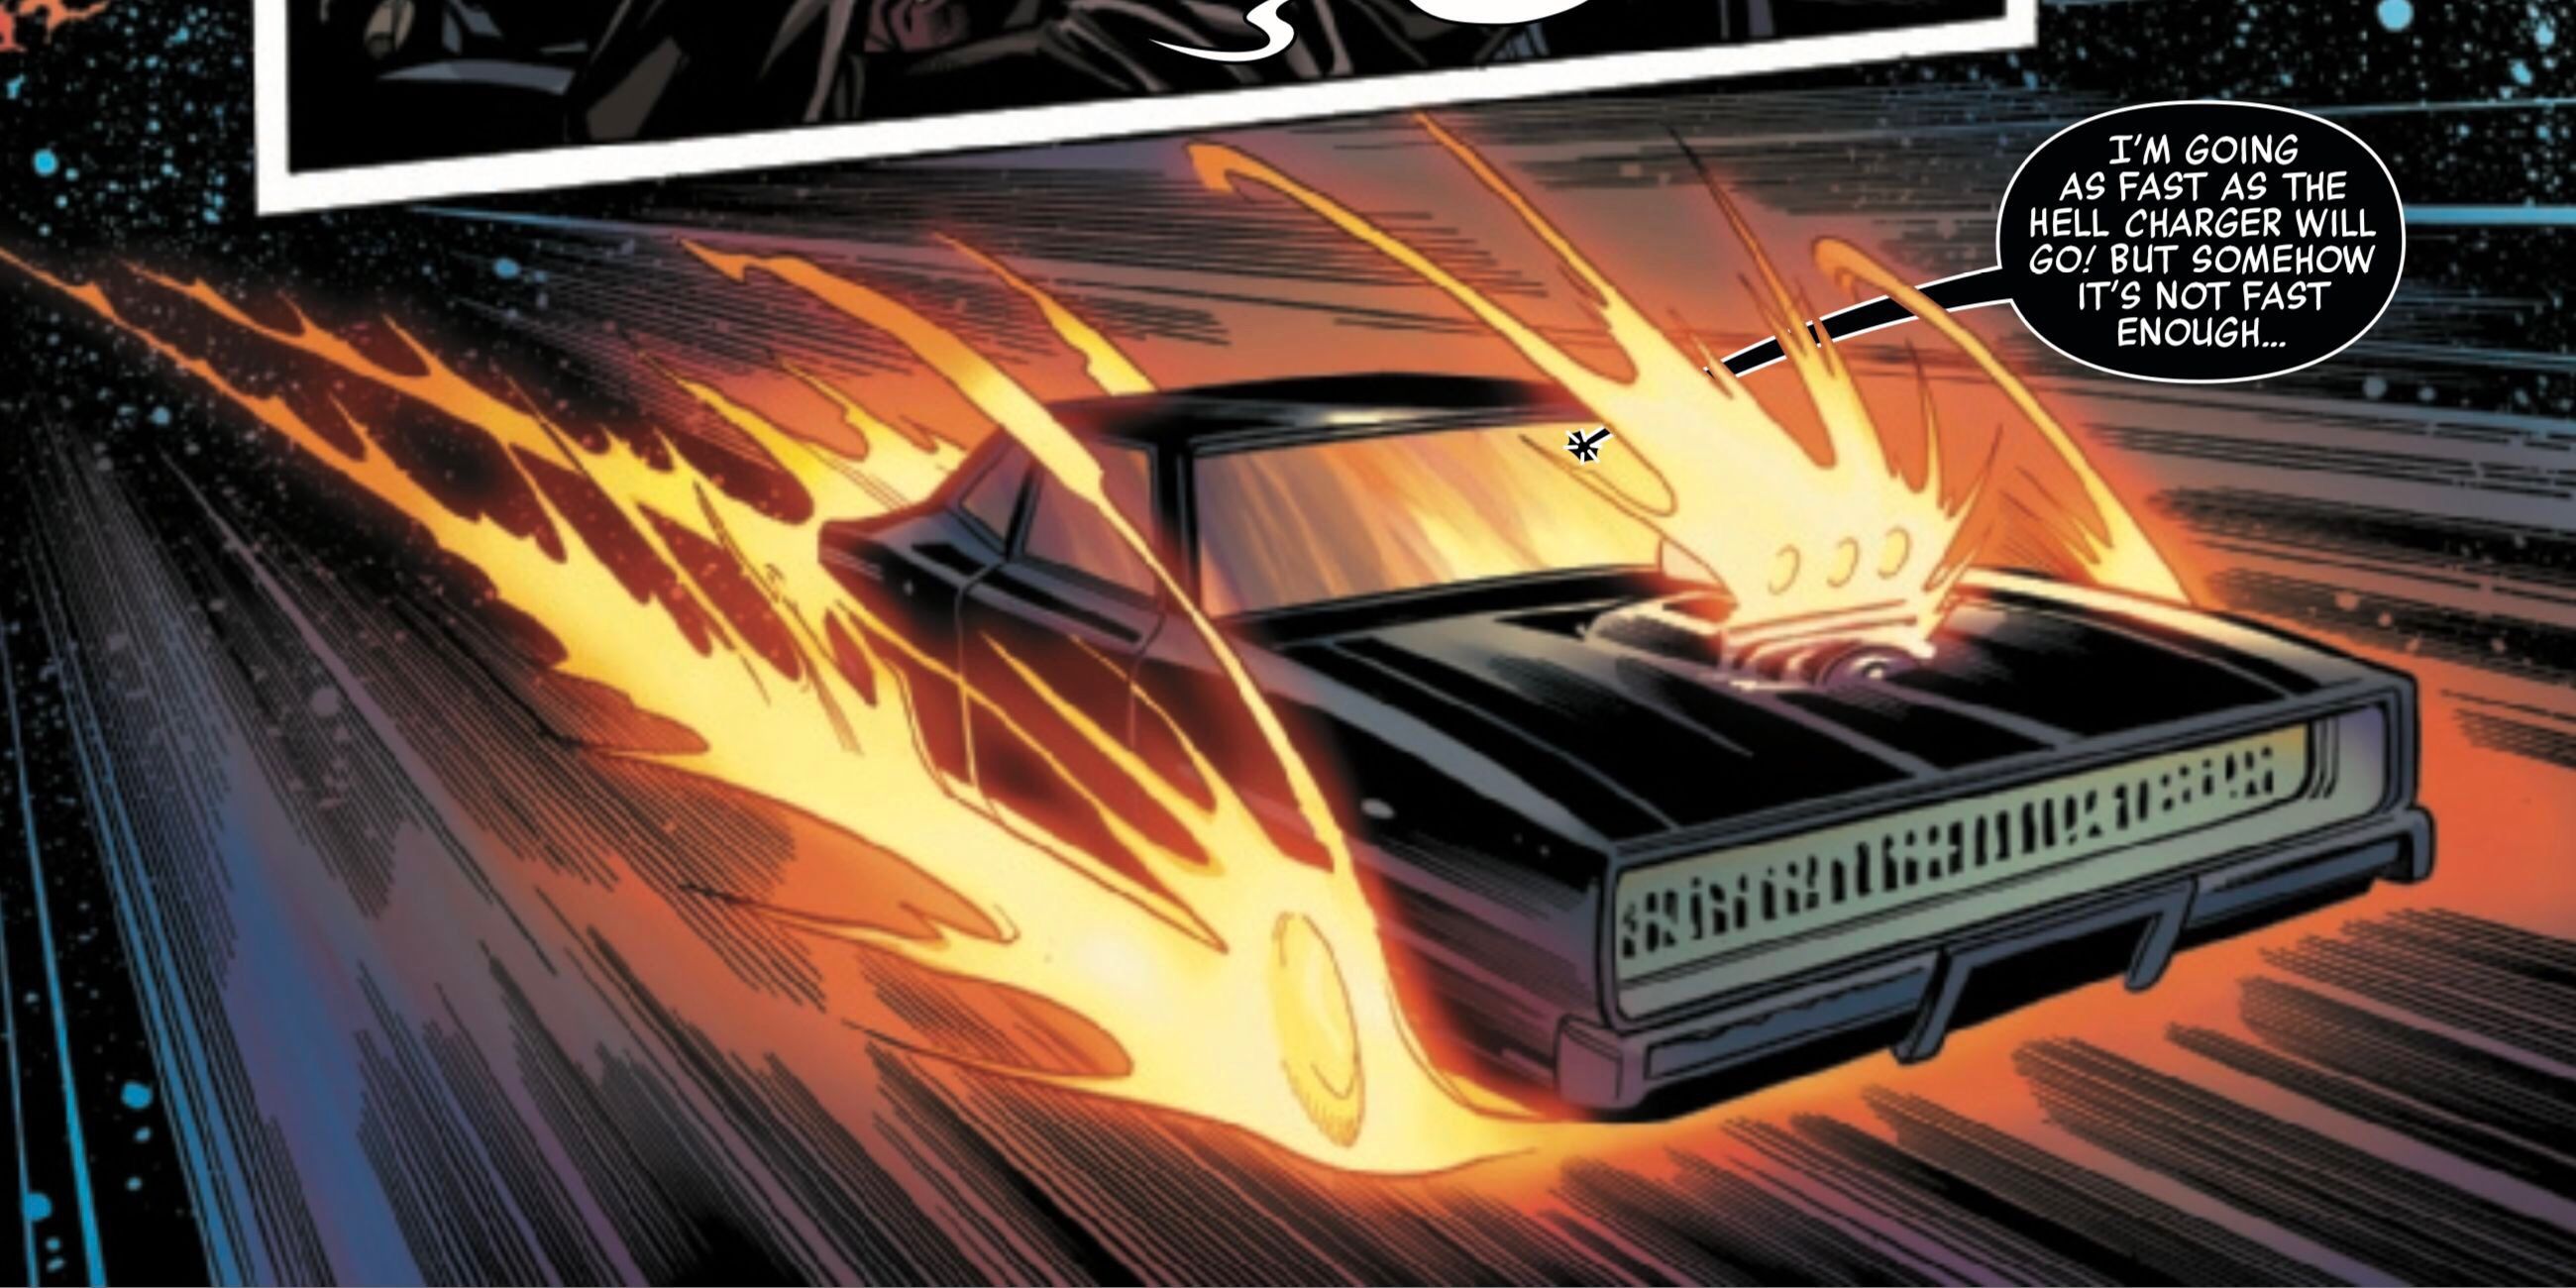 Ghost Rider’s Hell Charger in space